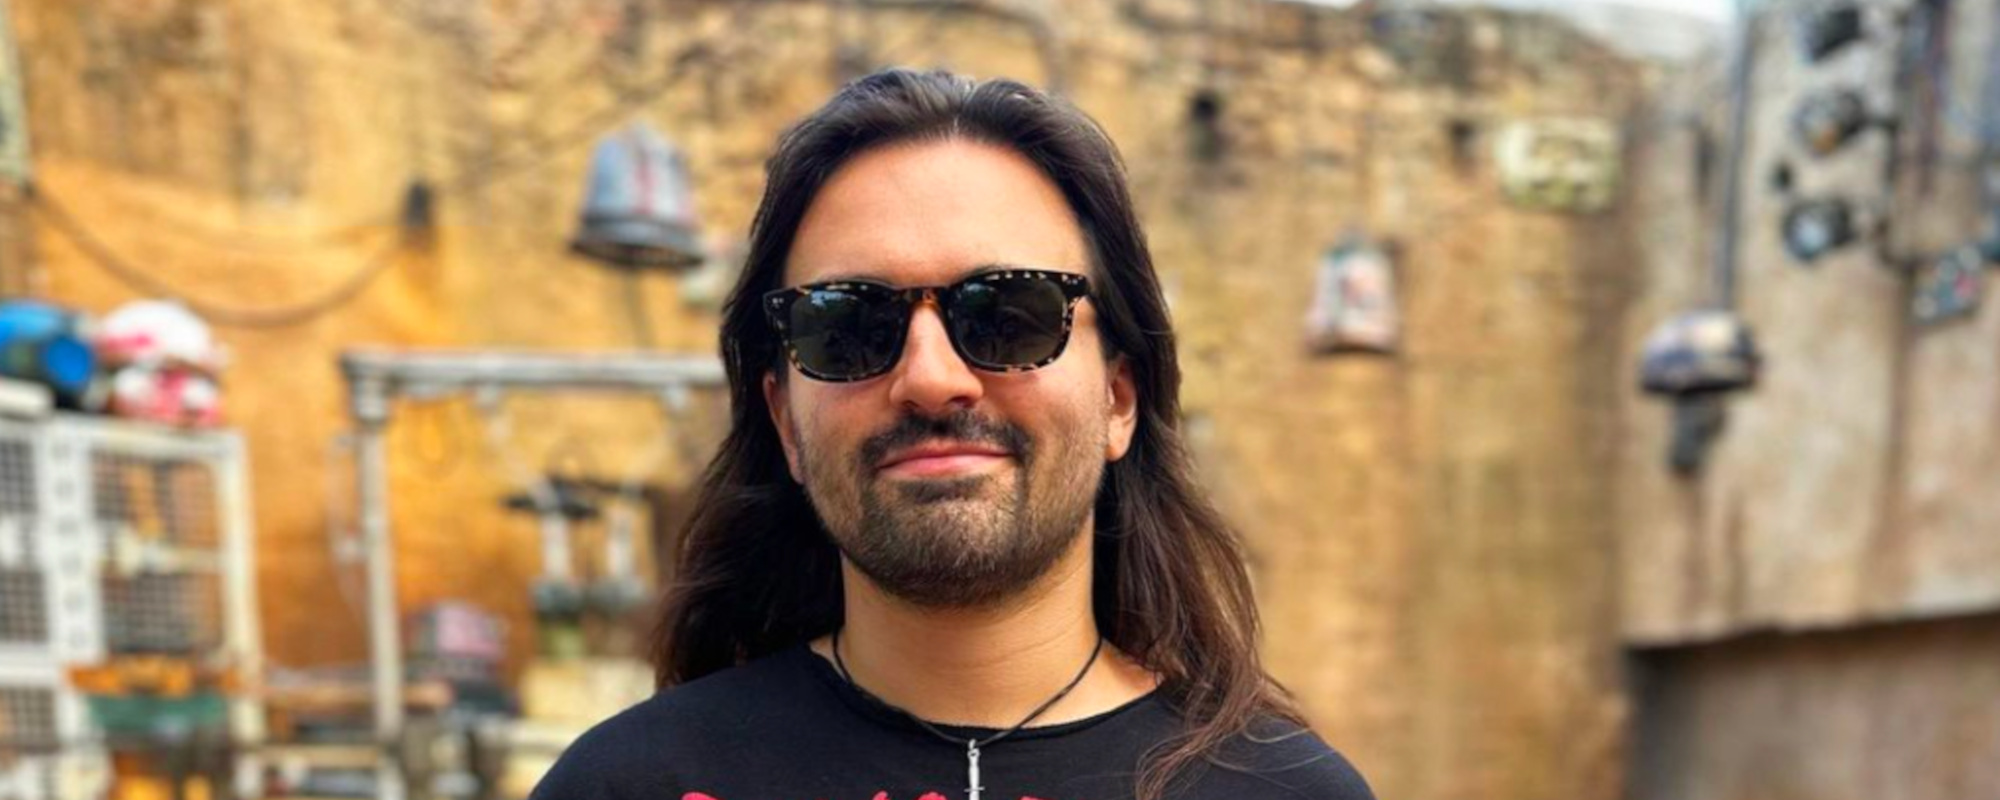 Slipknot Drummer Jay Weinberg Speaks Out About Being Fired—“I was Heartbroken and Blindsided”